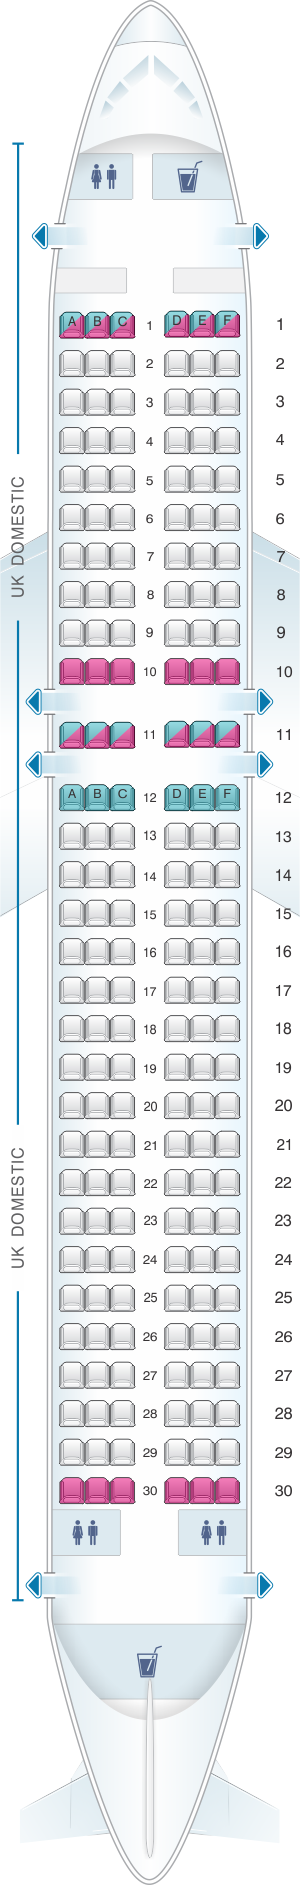 Seat map for British Airways Airbus A320 Neo